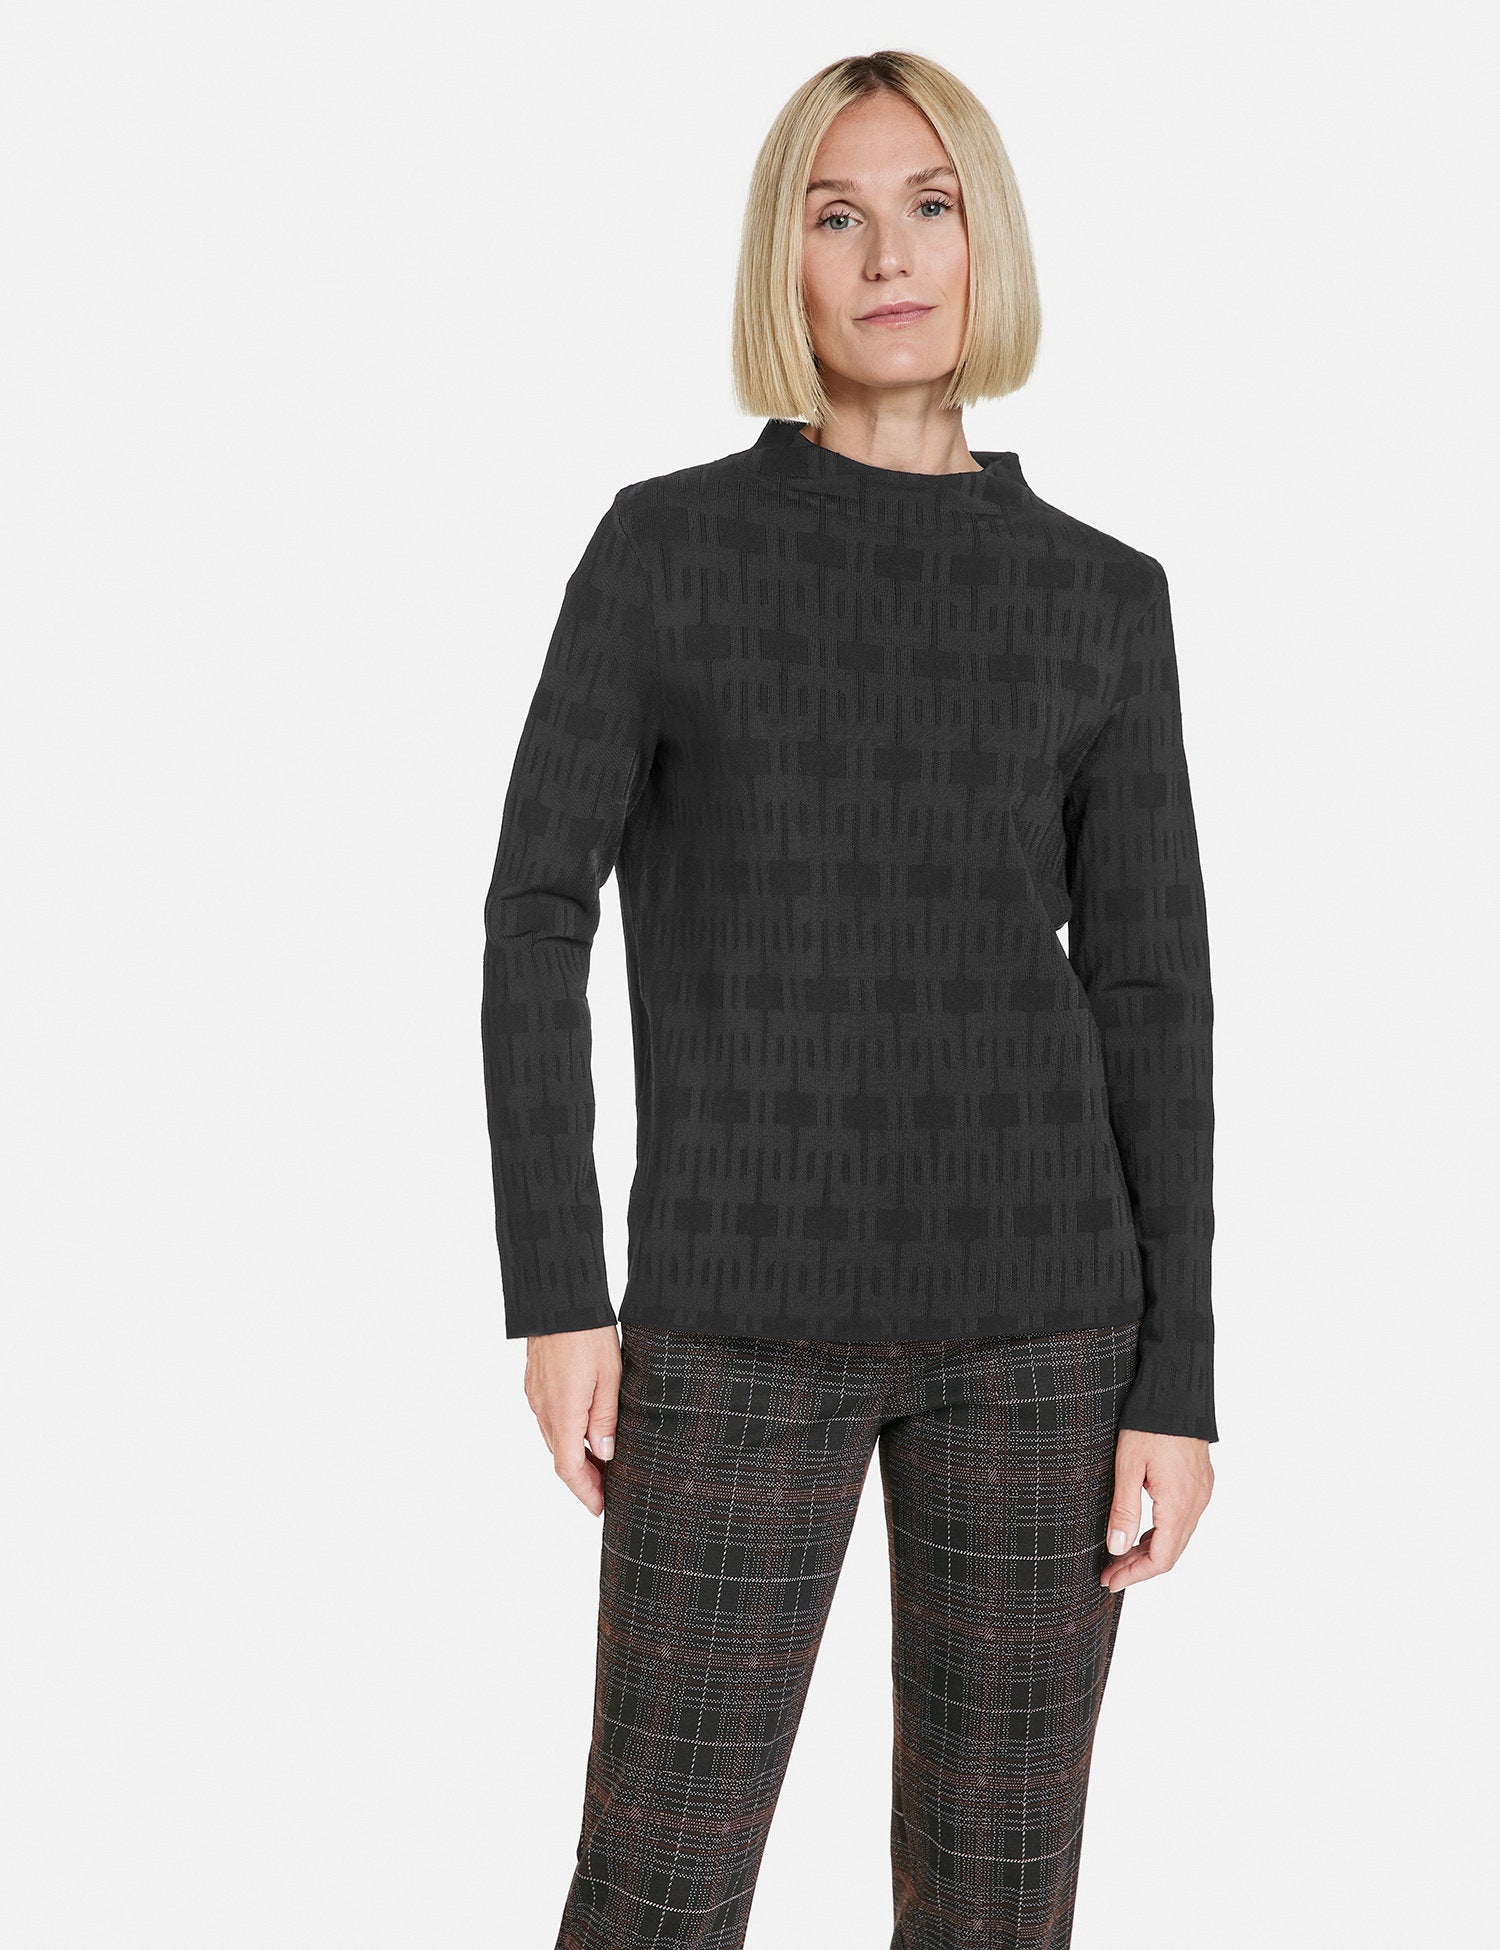 Jumper With A Short Stand Up Collar And A Jacquard Pattern_271022-35719_11000_07